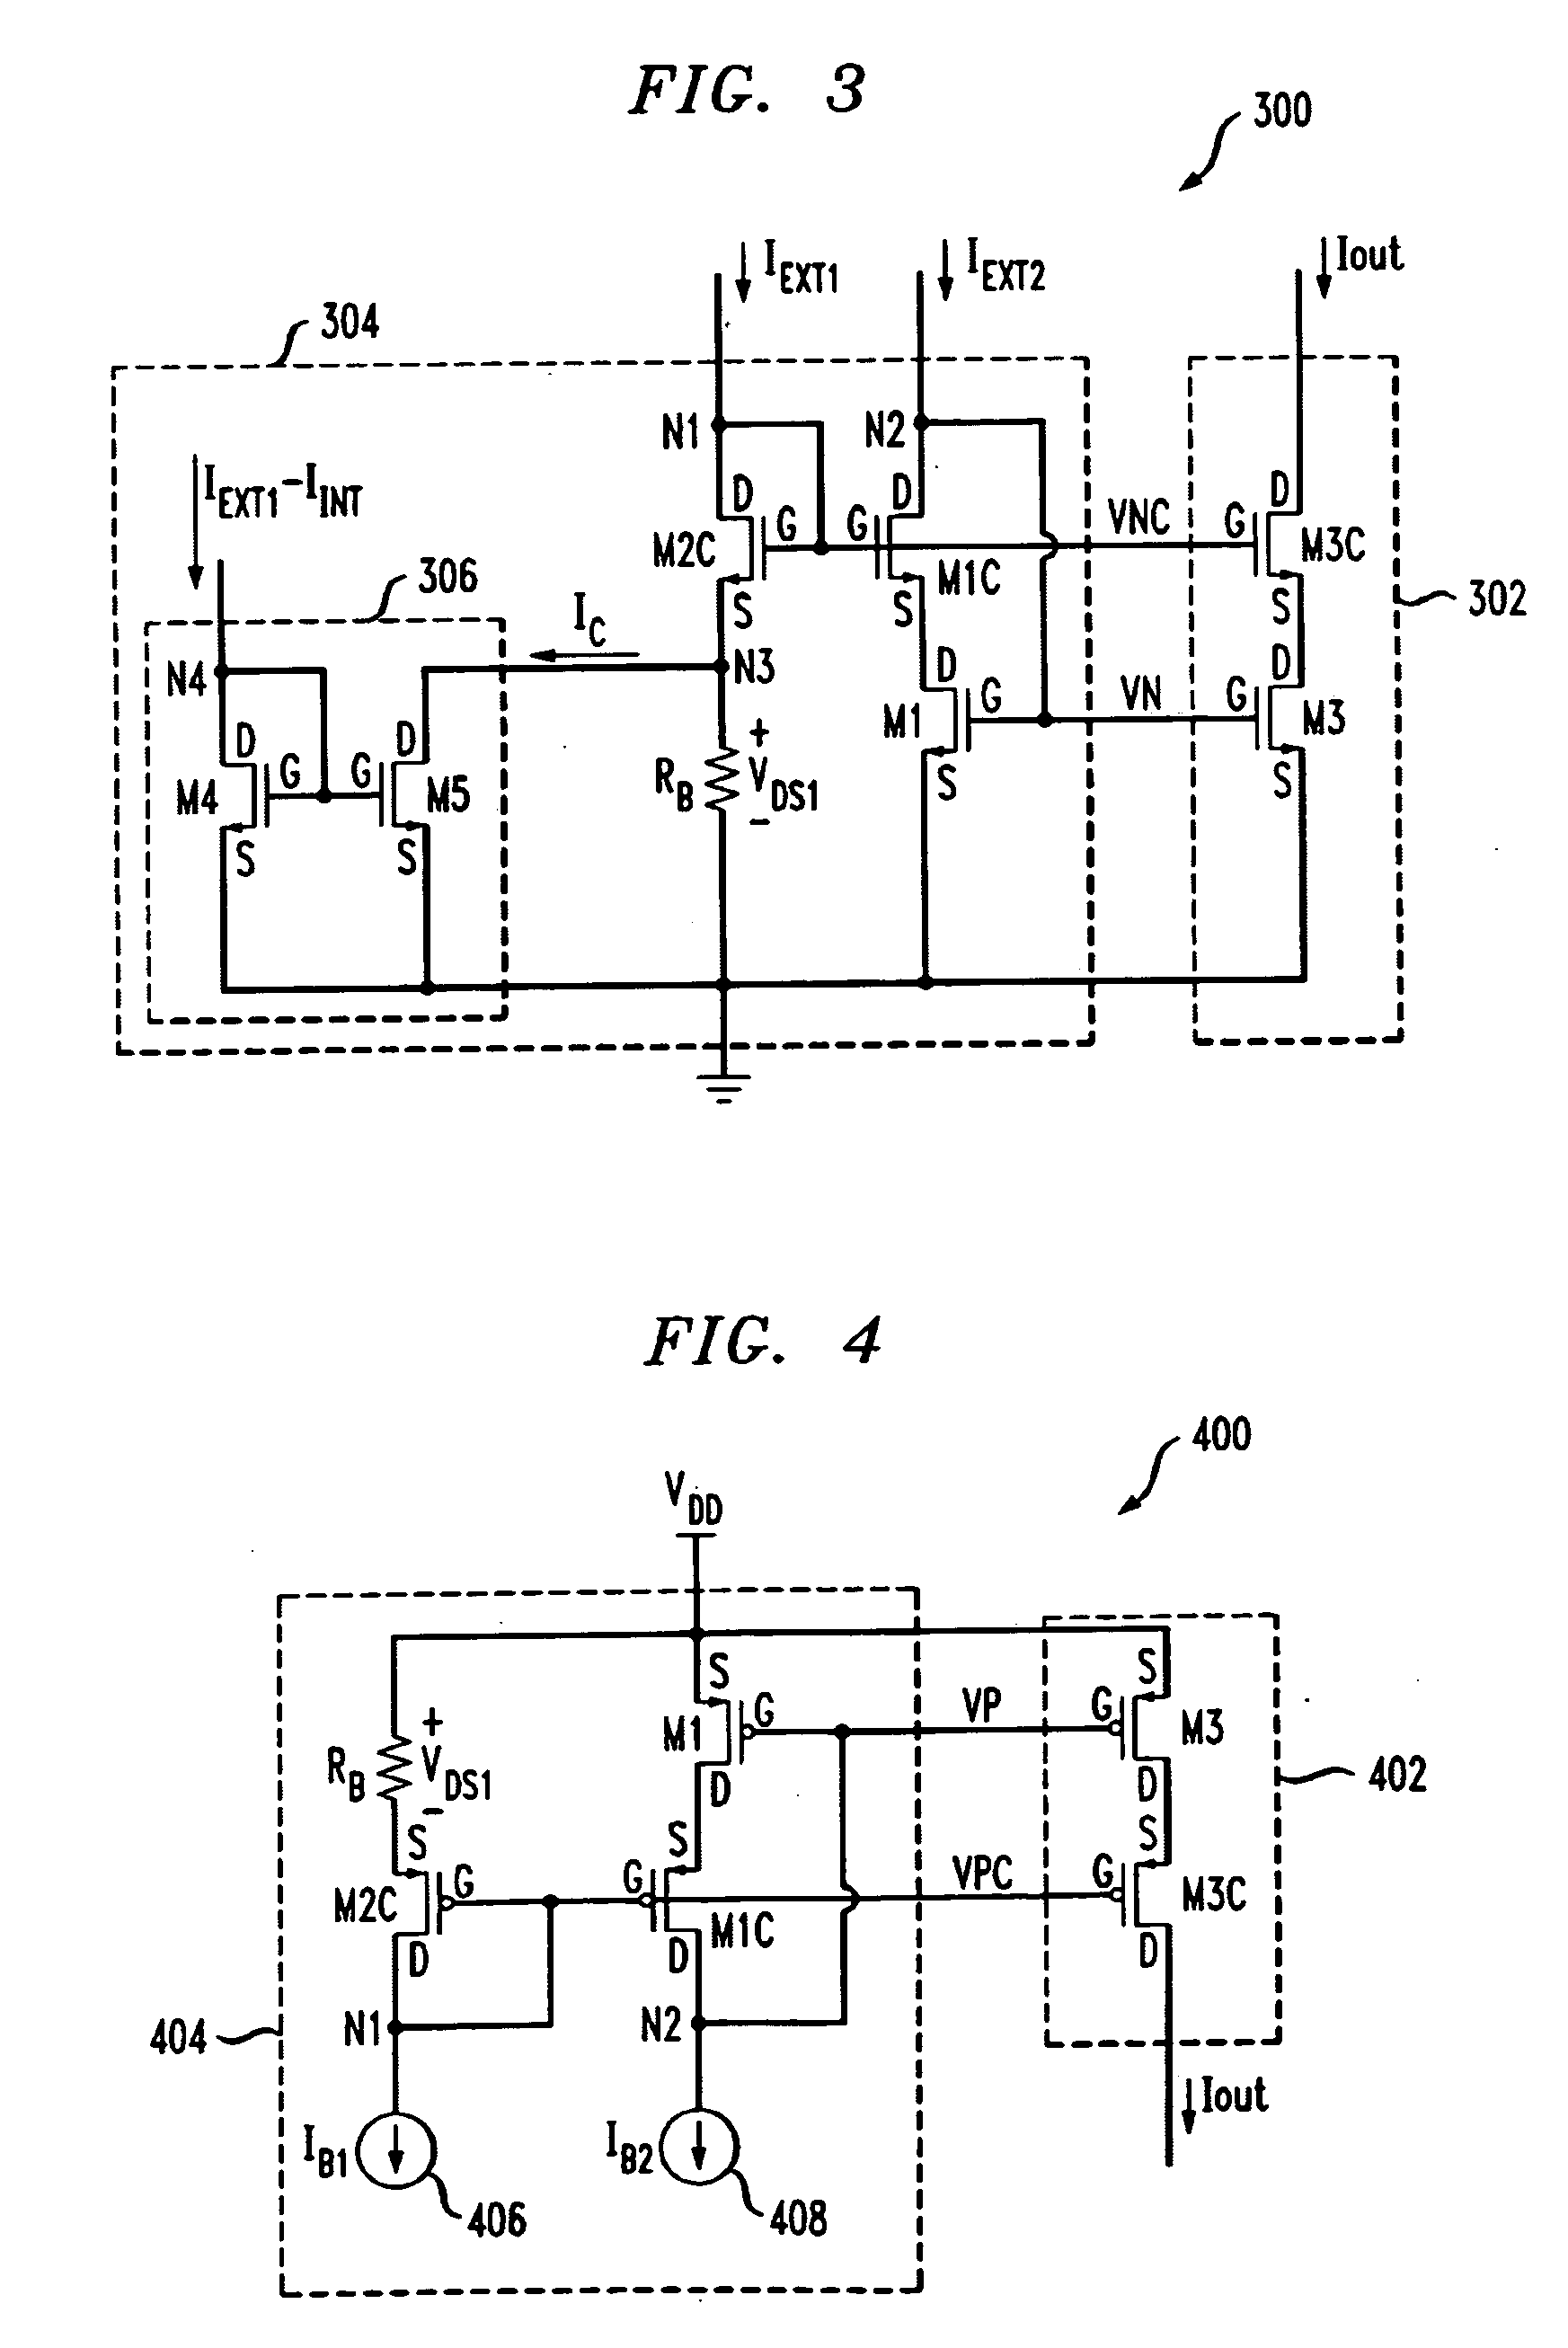 Bias circuit for high-swing cascode current mirrors